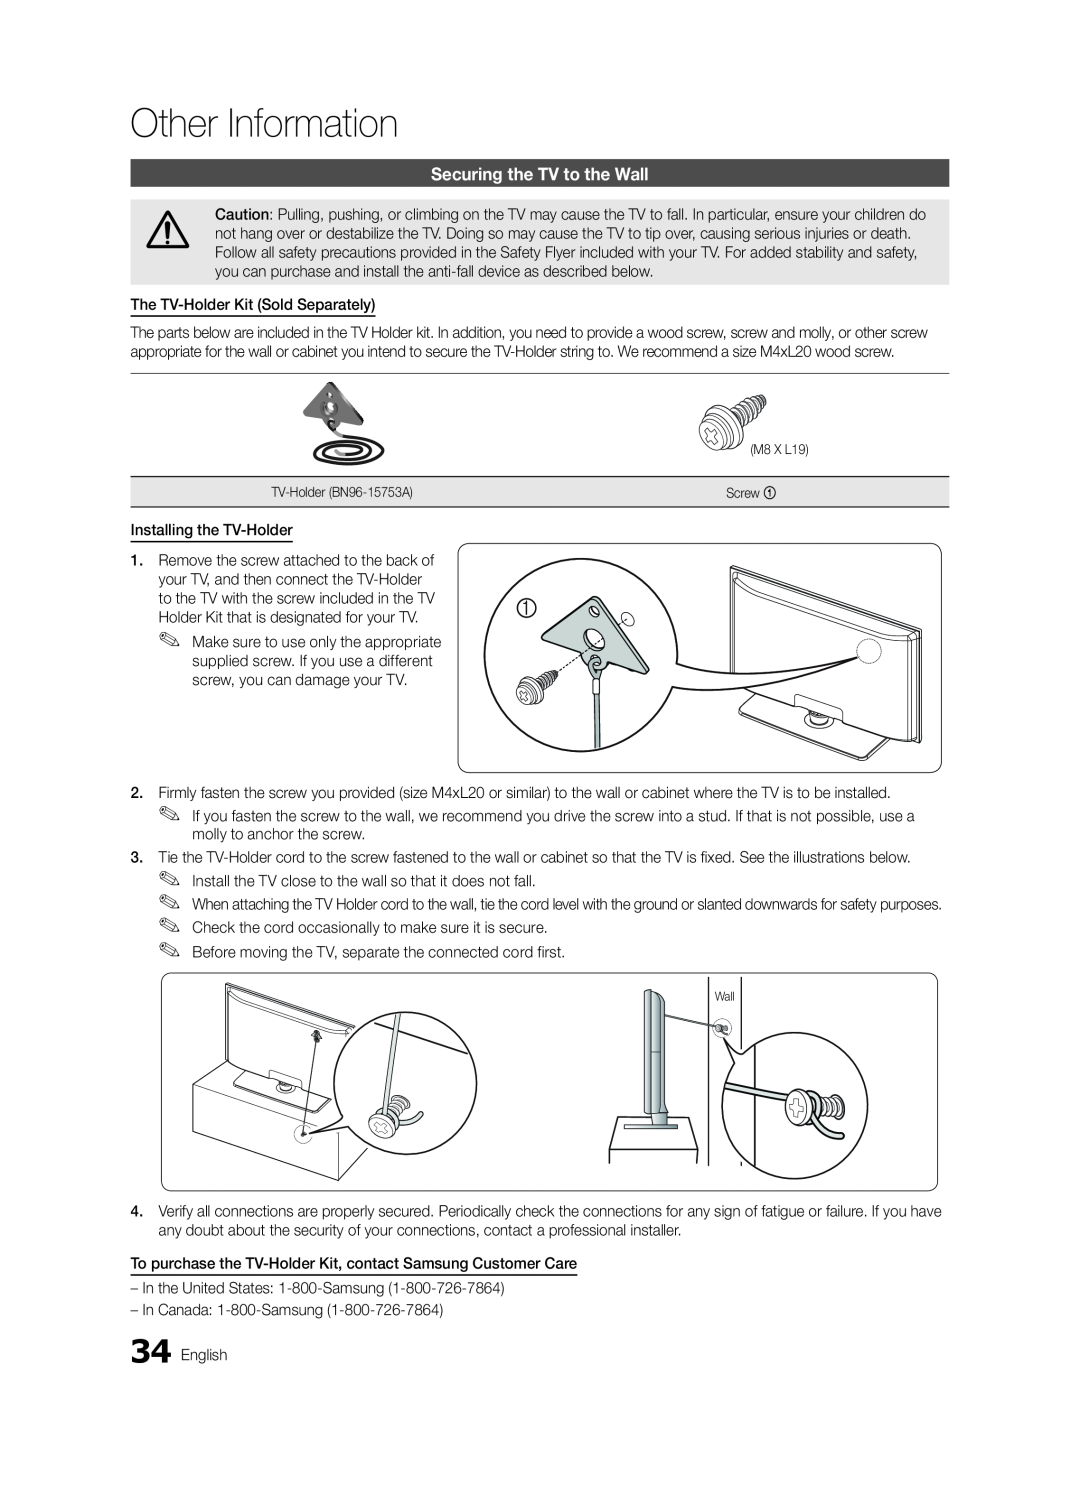 Samsung LN46C530, LN52C530, LN37C530, LN32C530, LN46C540 user manual Securing the TV to the Wall, Other Information 